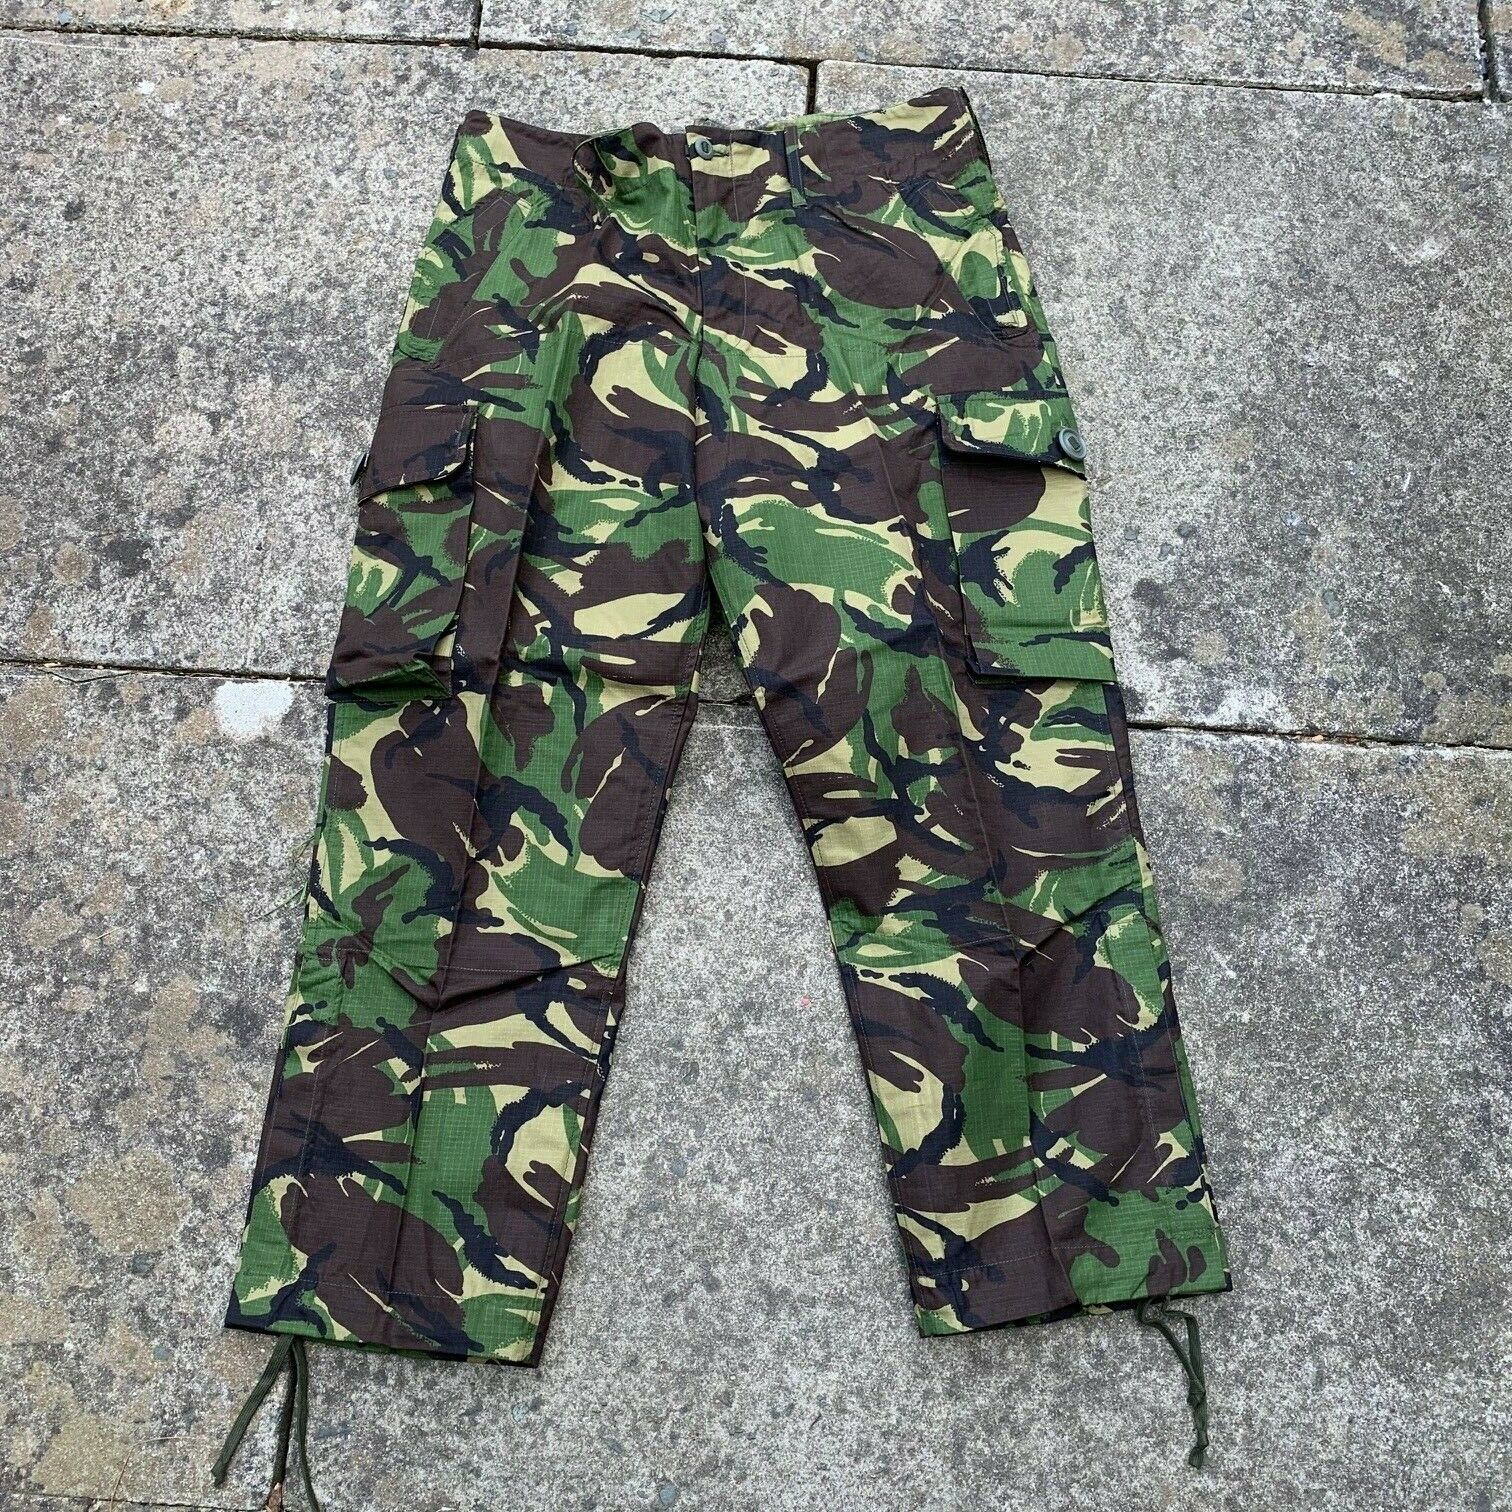 NEW BRITISH ARMY SURPLUS ISSUE RIP-STOP WOODLAND DPM WINDPROOF COMBAT TROUSERS 